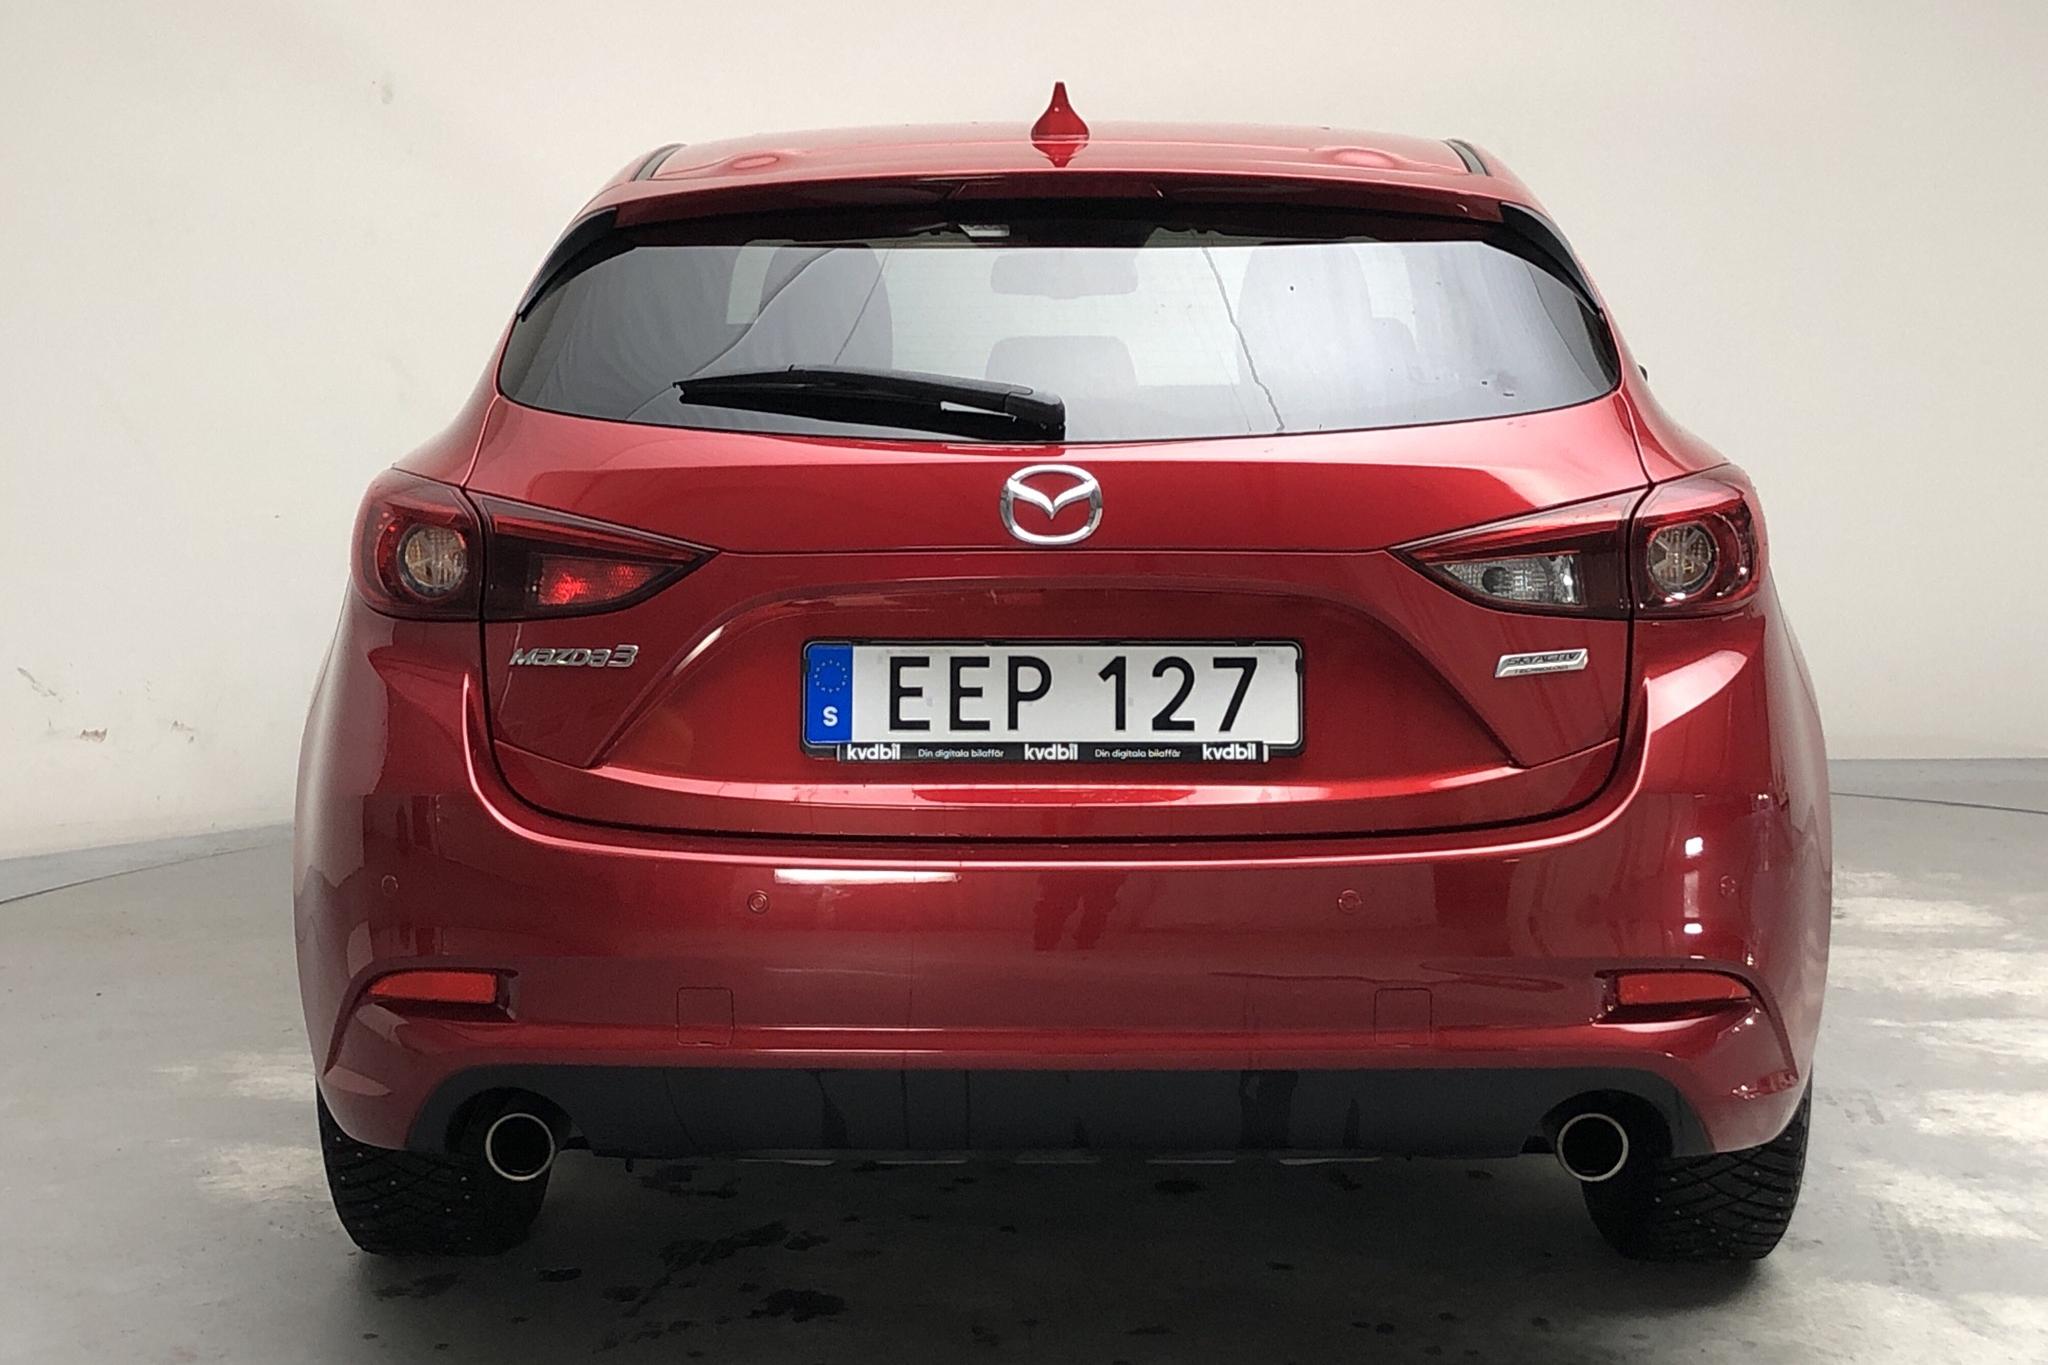 Mazda 3 2.0 5dr (120hk) - 41 490 km - Automatic - red - 2018